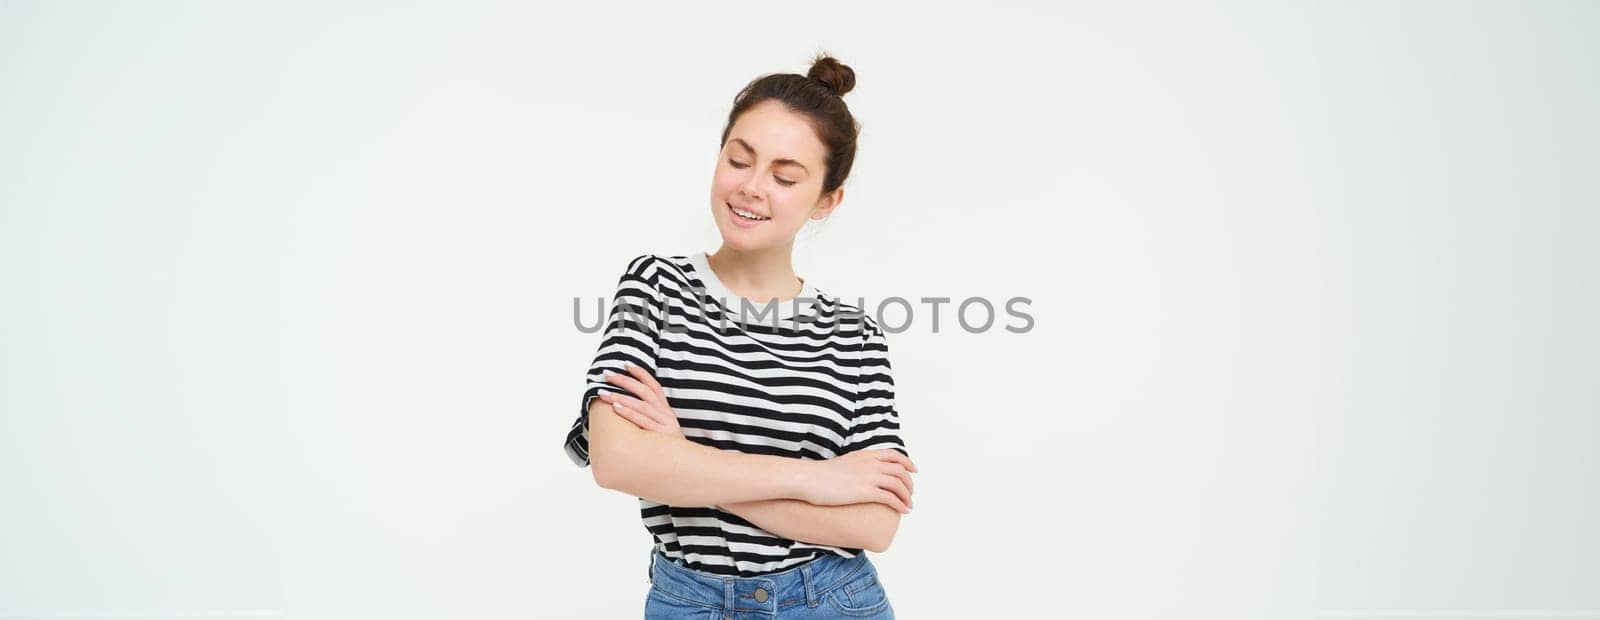 Portrait of attractive, stylish young woman, 25 years old, wearing t-shirt, cross arms against chest and smiling, looking confident, isolated over white background.